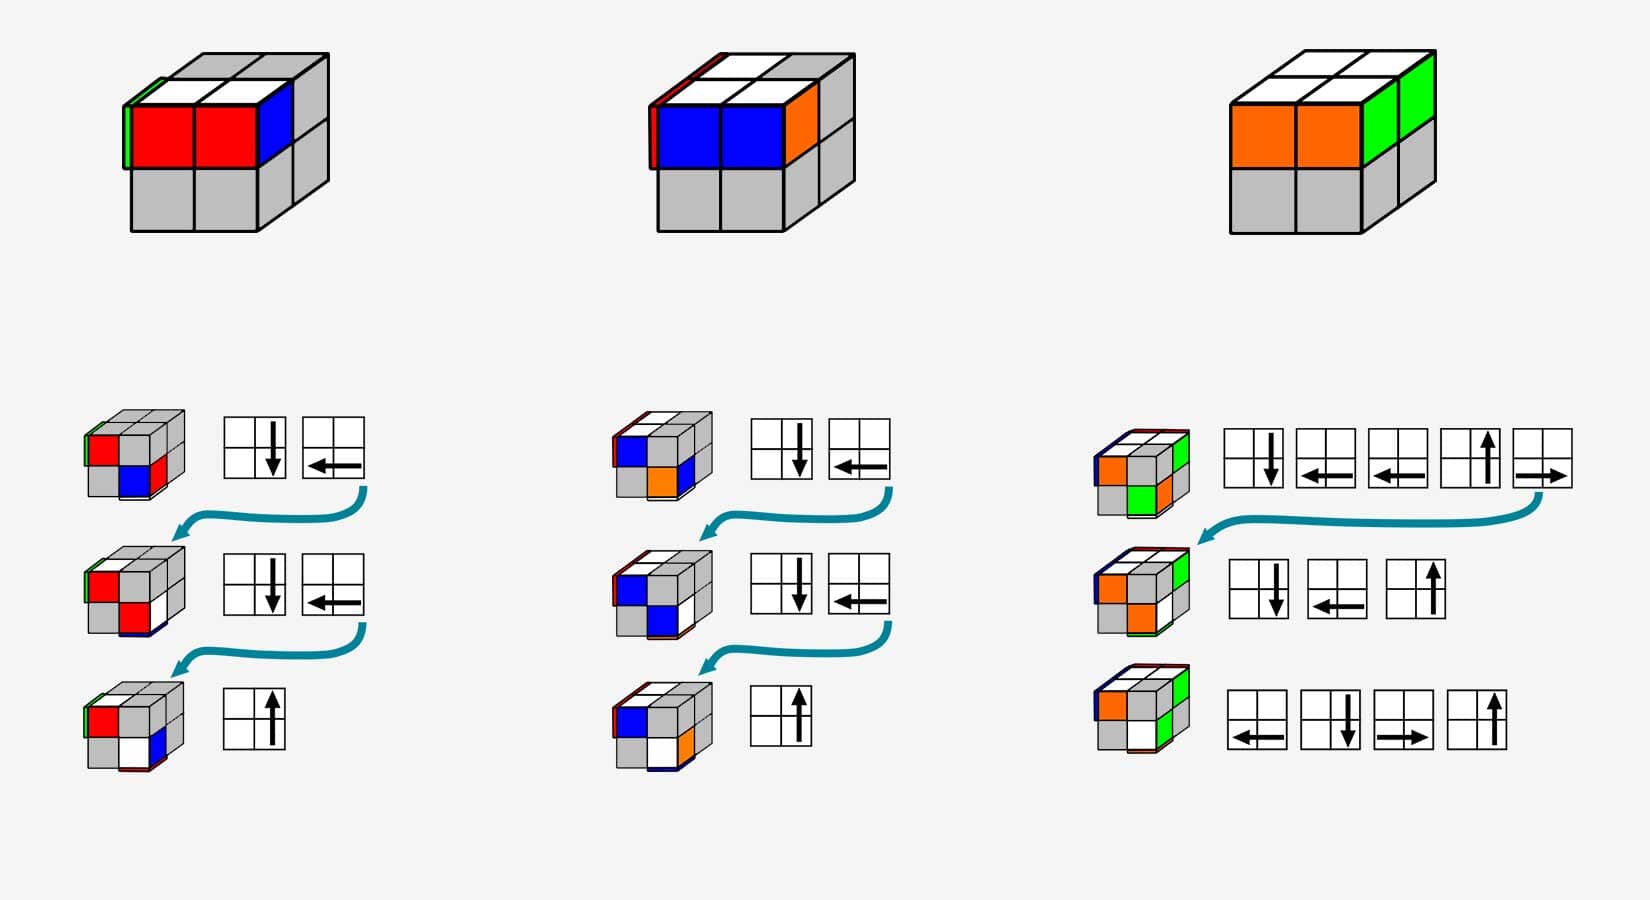 How to Solve a 2x2 Rubik's Cube in a Minute, The Quickest Tutorial